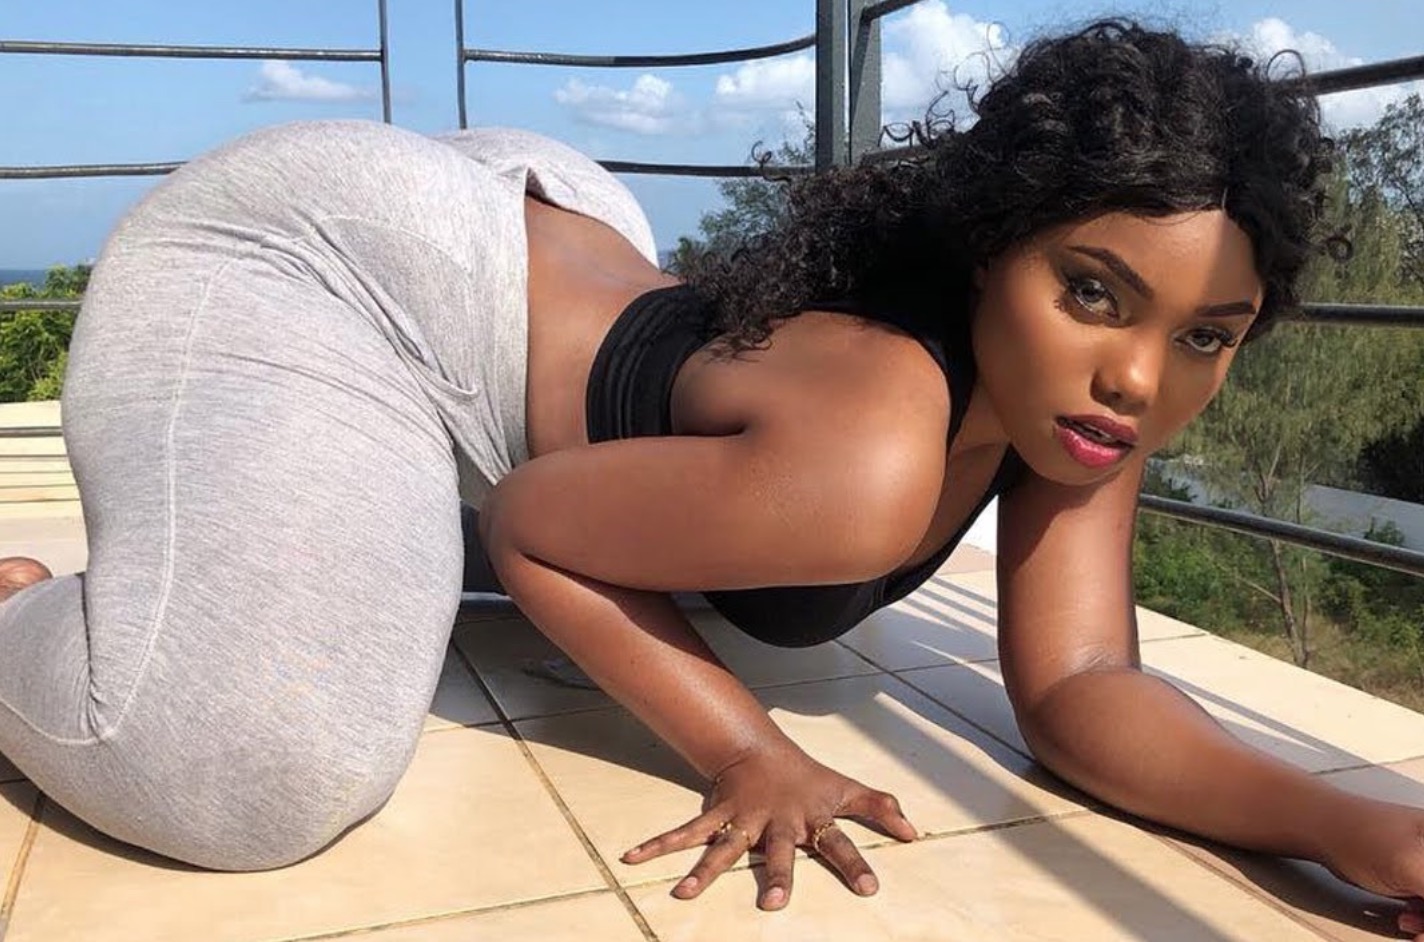 Football match between Tz & Kenya turned into booty competition! 